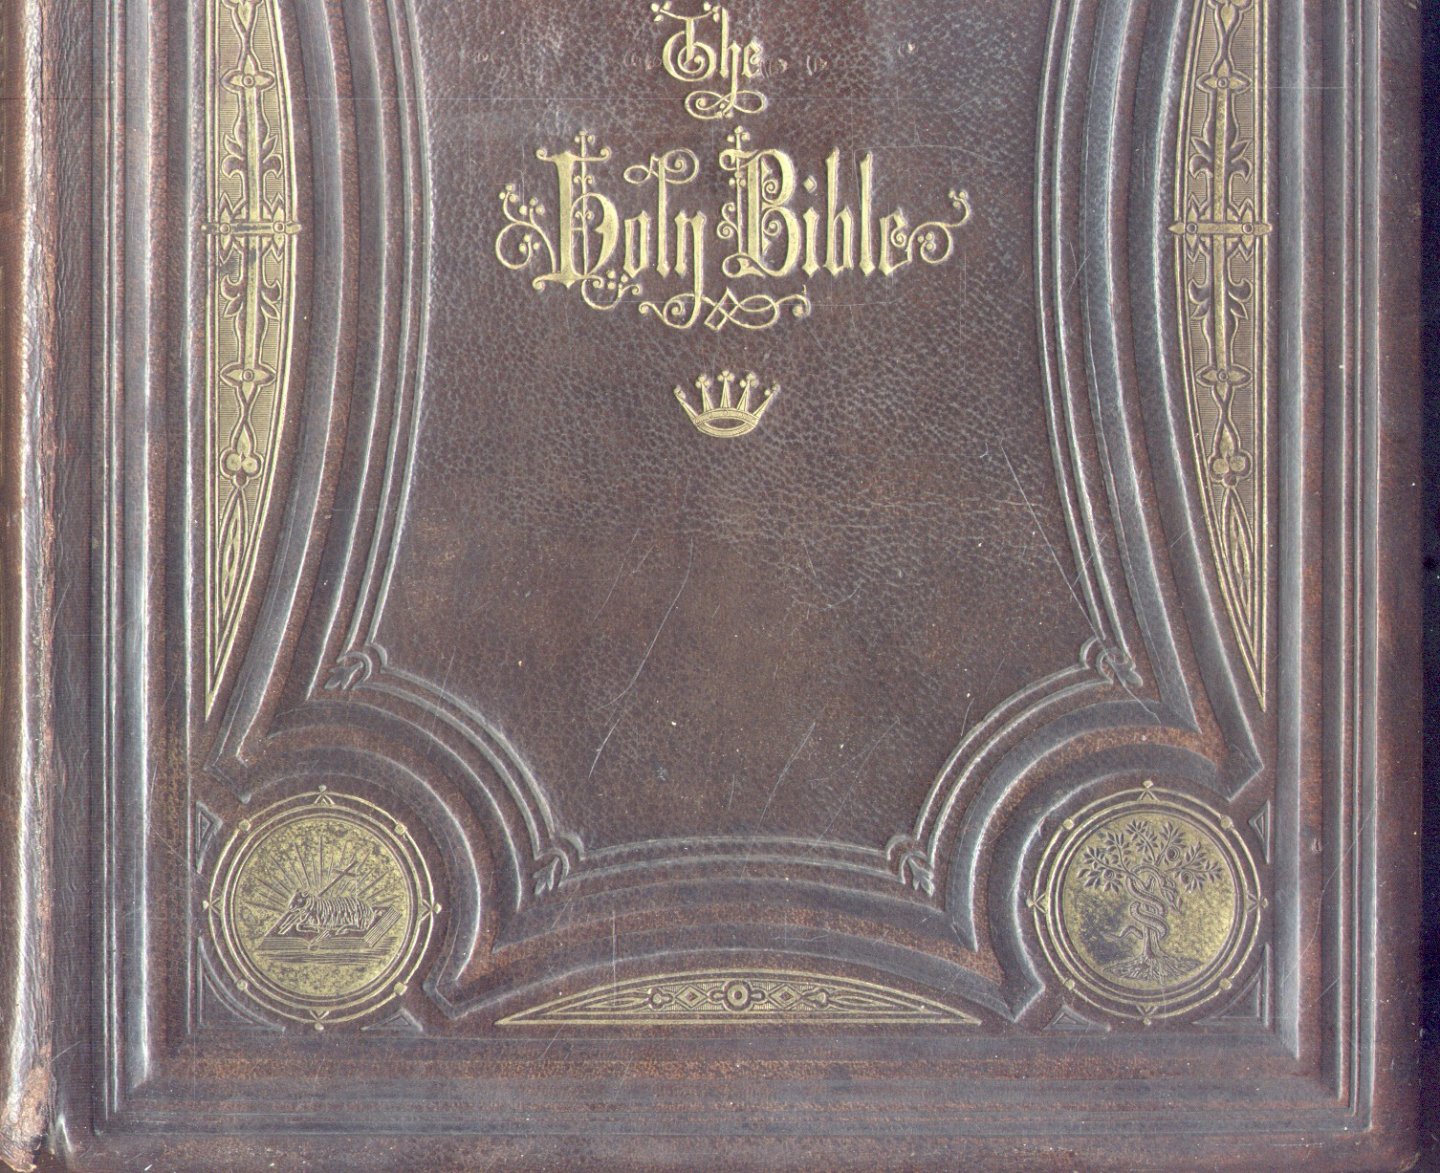 Brown, Rev. John - The Holy Bible (Practical and Devotional Family Bible. Illustrated, containing the Old & New Testaments)